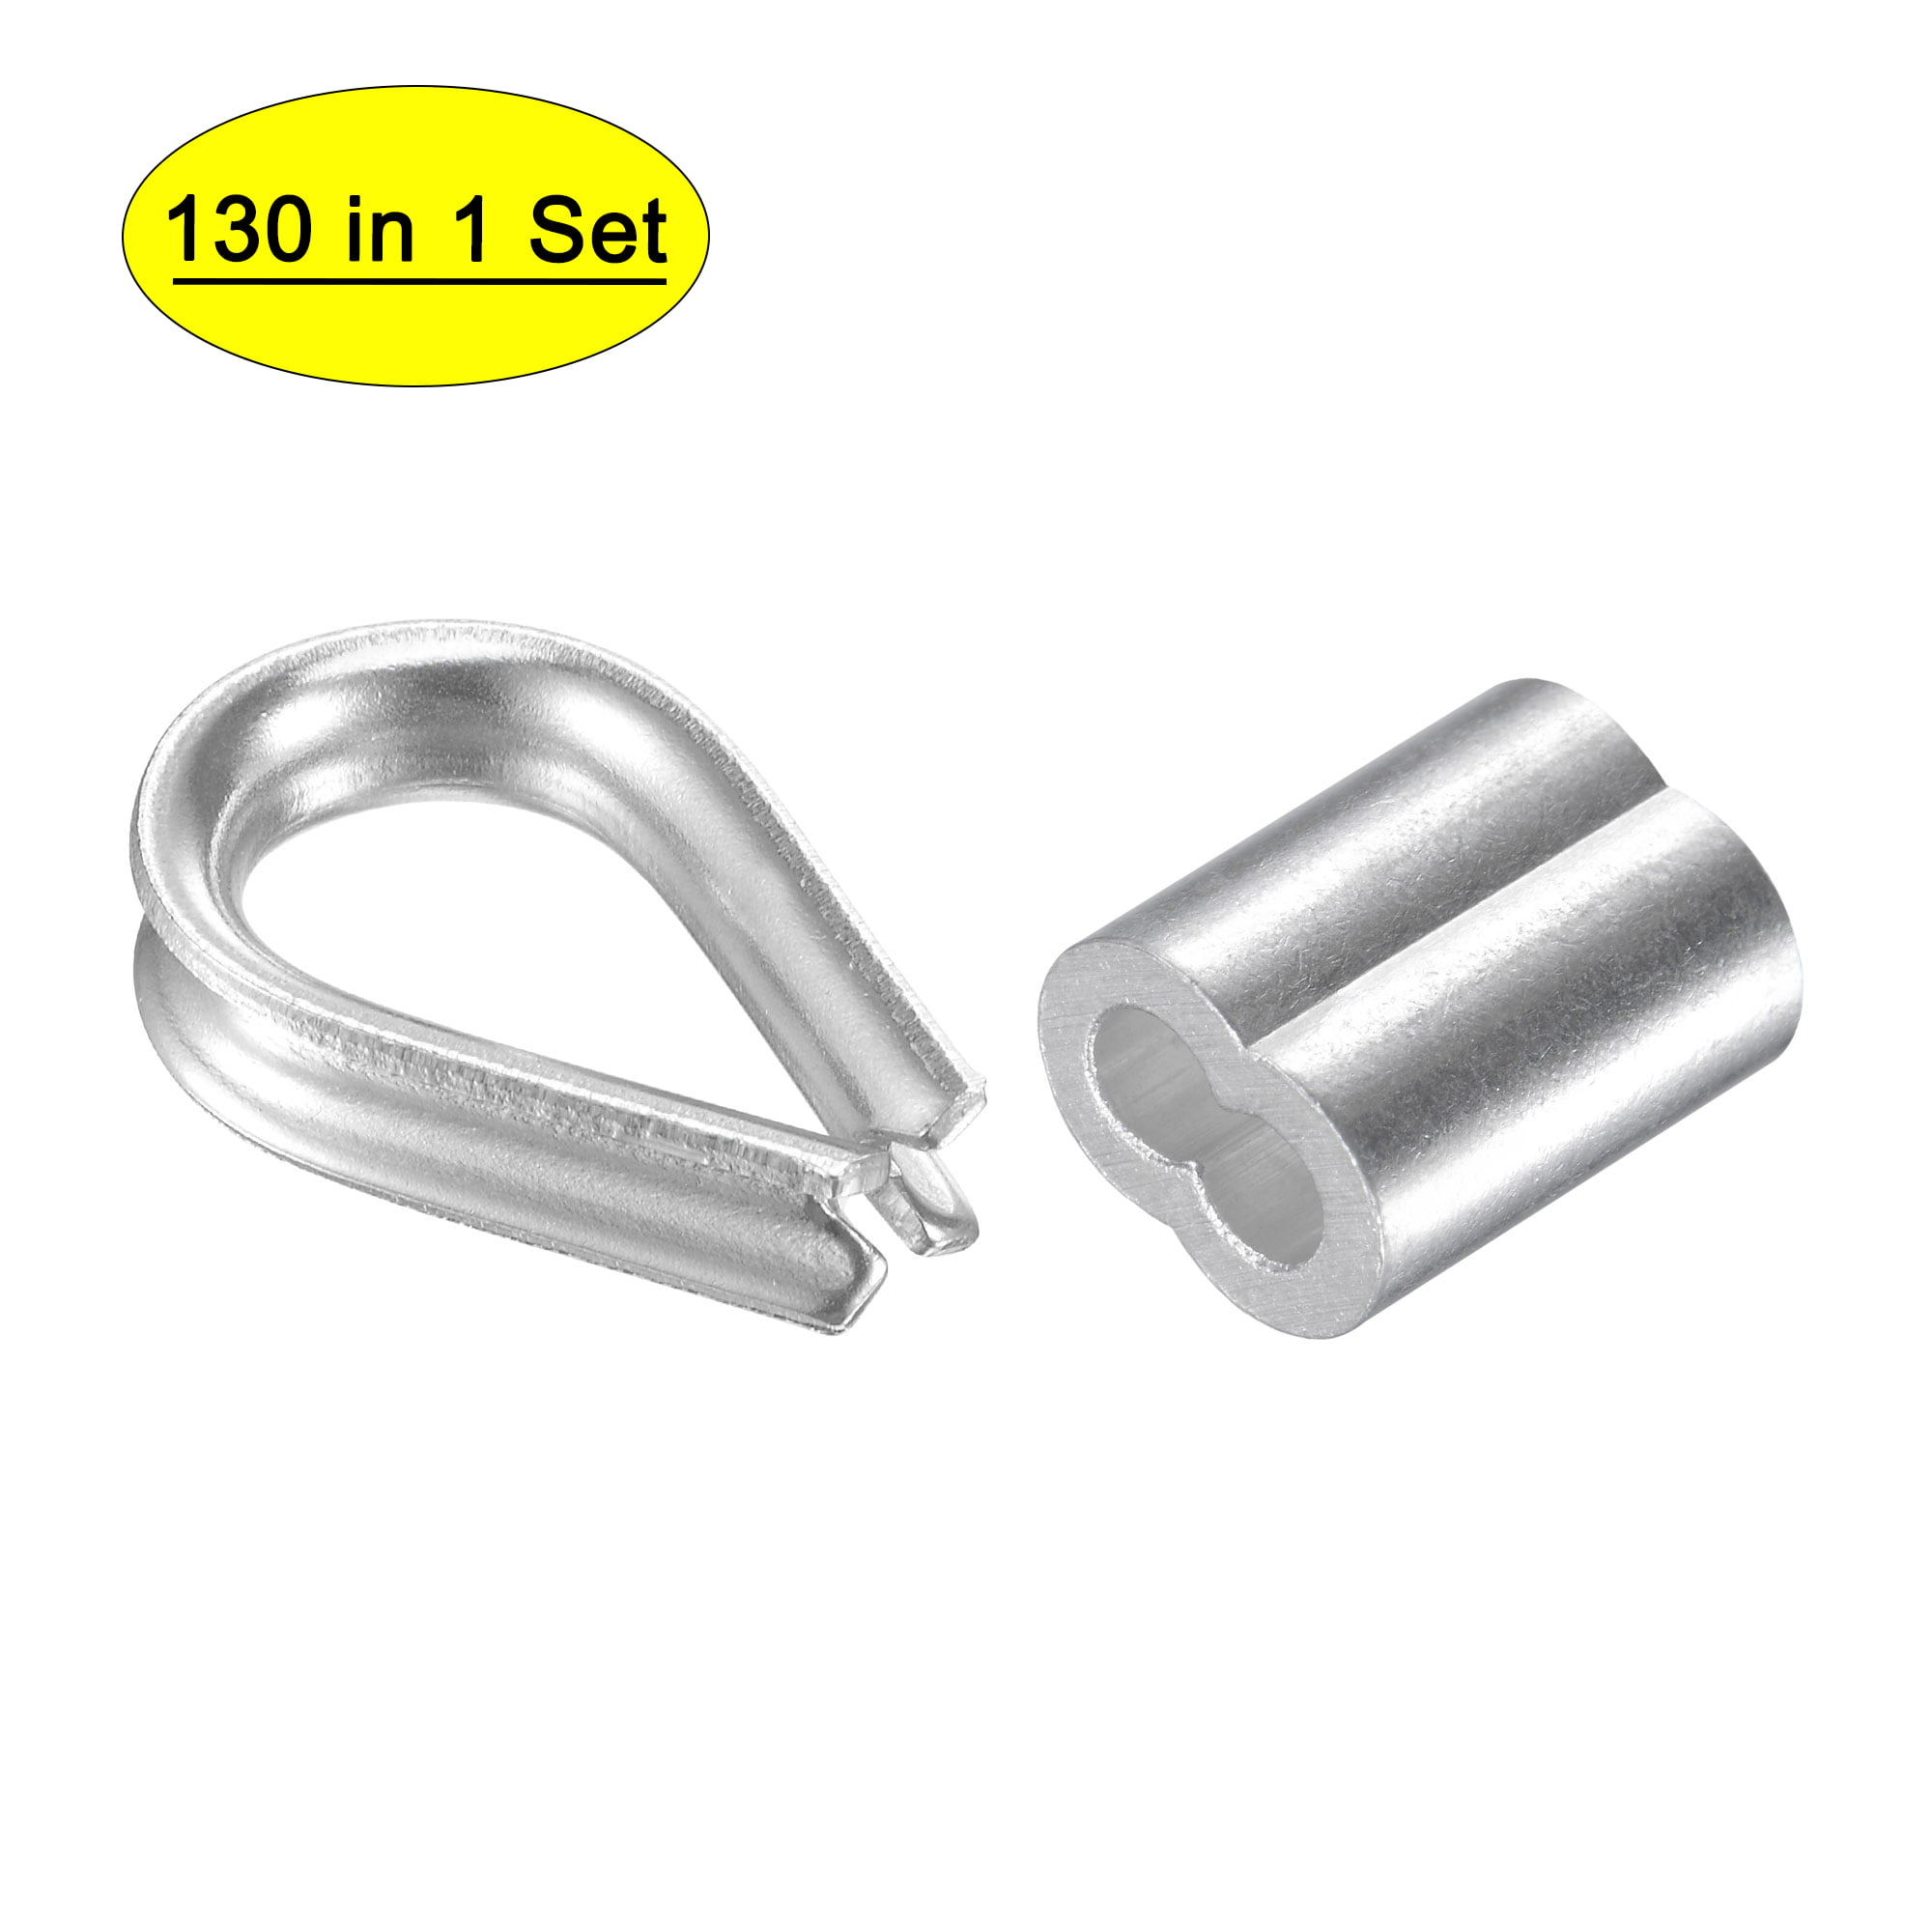 Uxcell M2 Stainless Steel Wire Rope Thimble Rigging Kit, 2.5mm